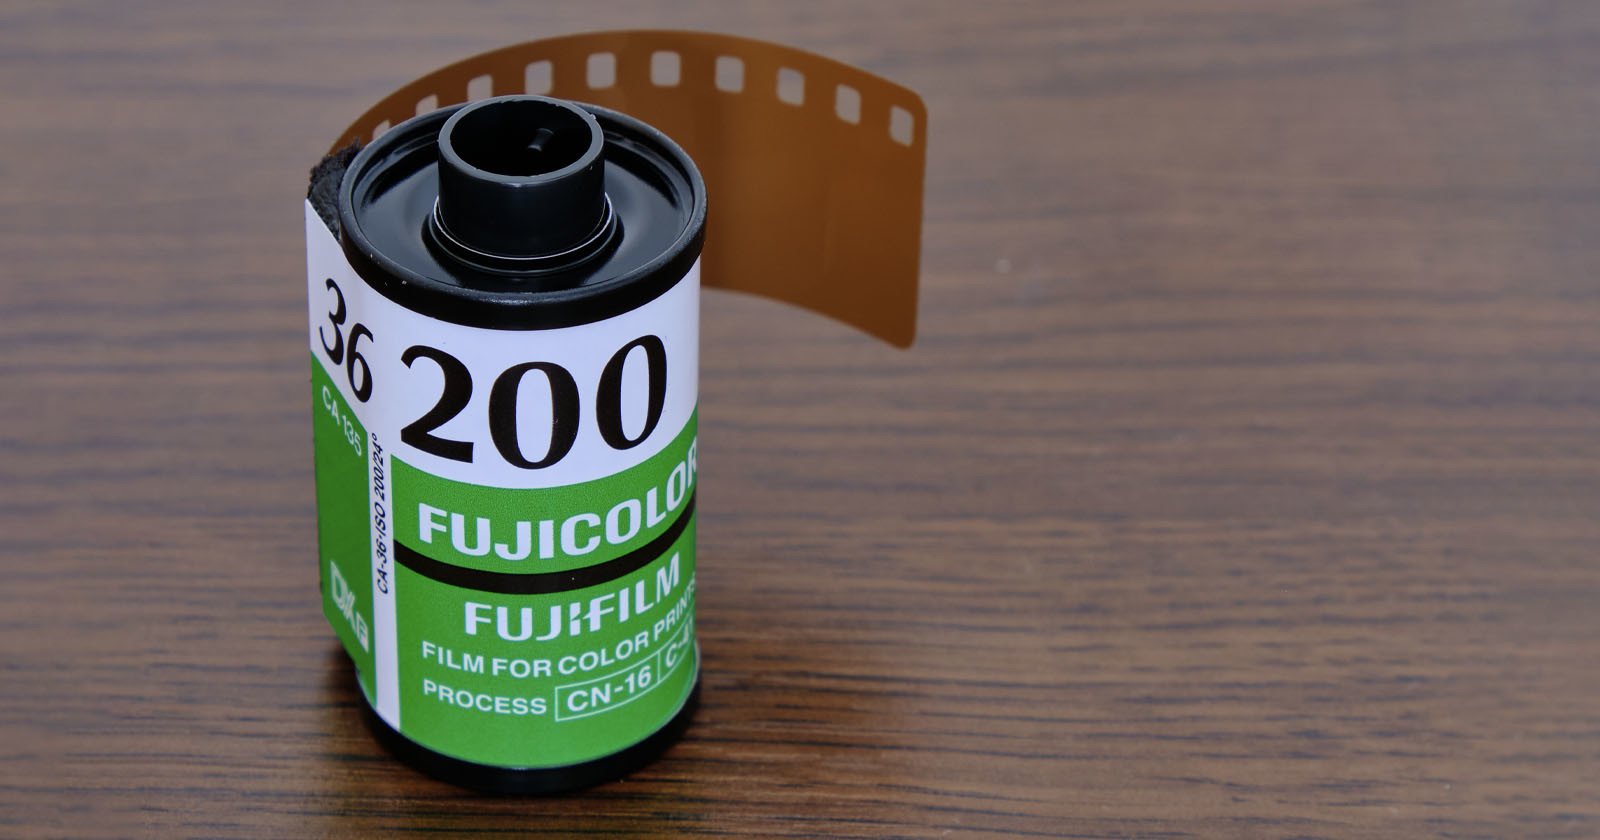 Fujifilm to Only Increase Film Prices by 25% in North America